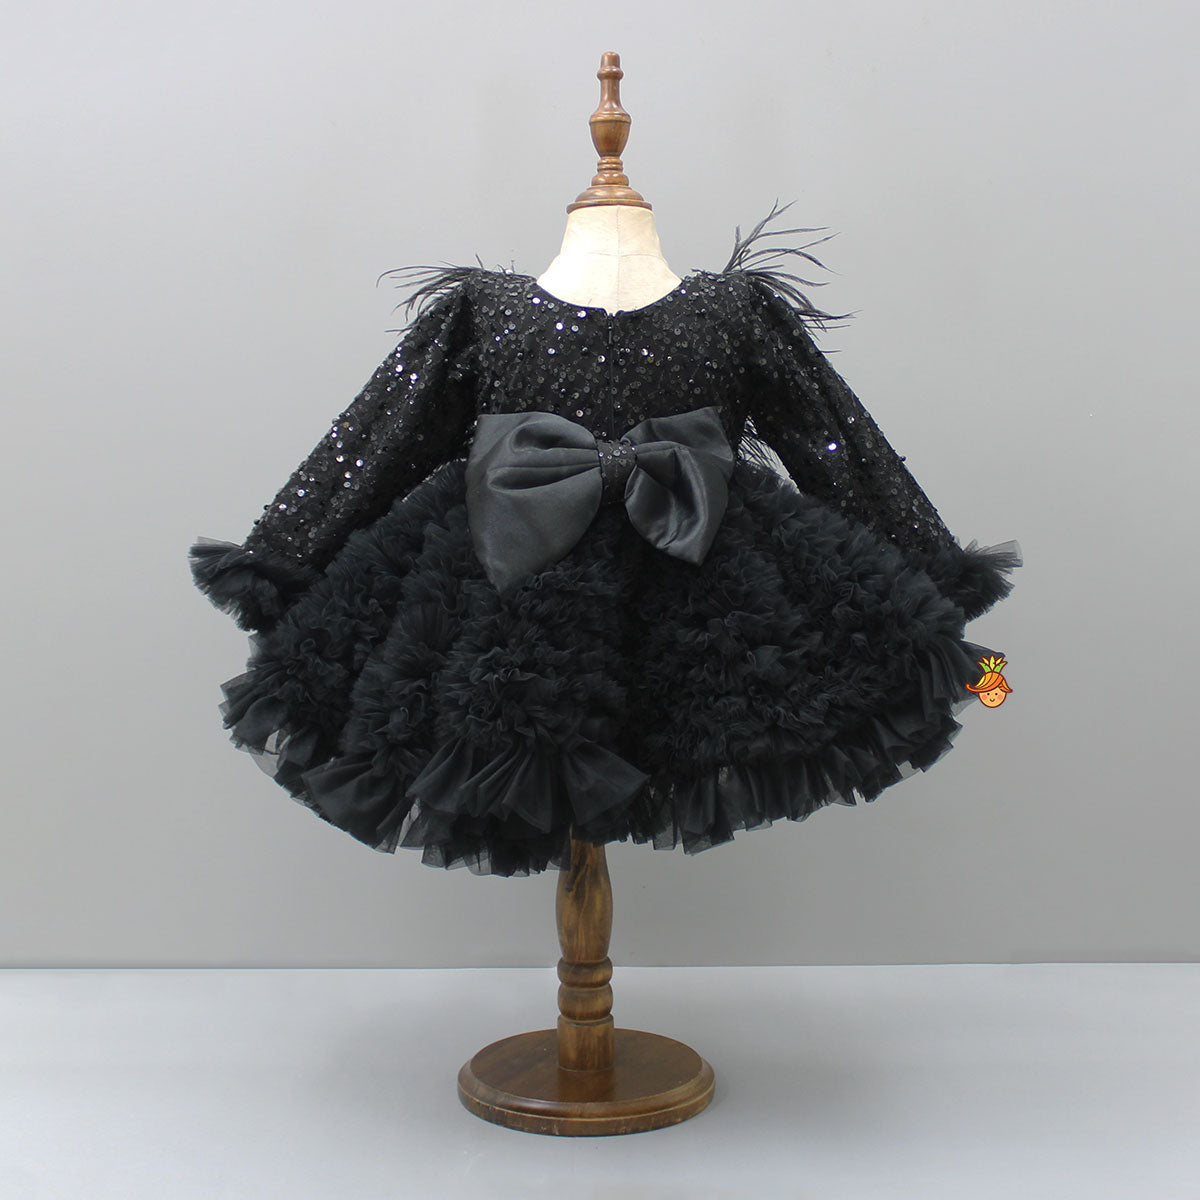 Sequins Embellished Ruffled Black Dress With Matching Swirled Bowie Headband